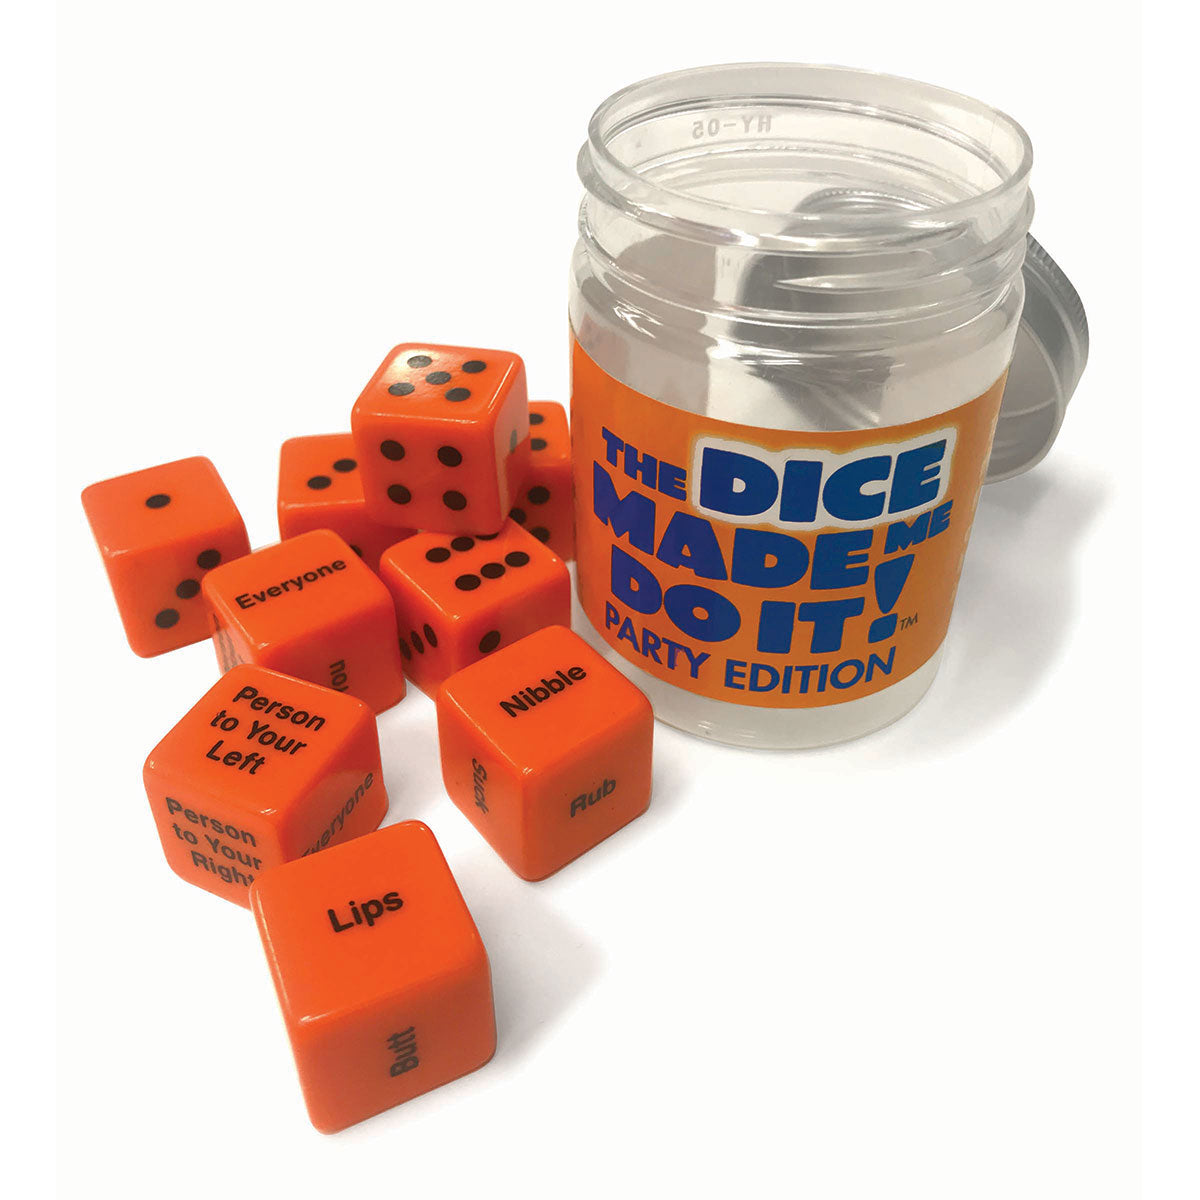 The Dice Made Me Do It